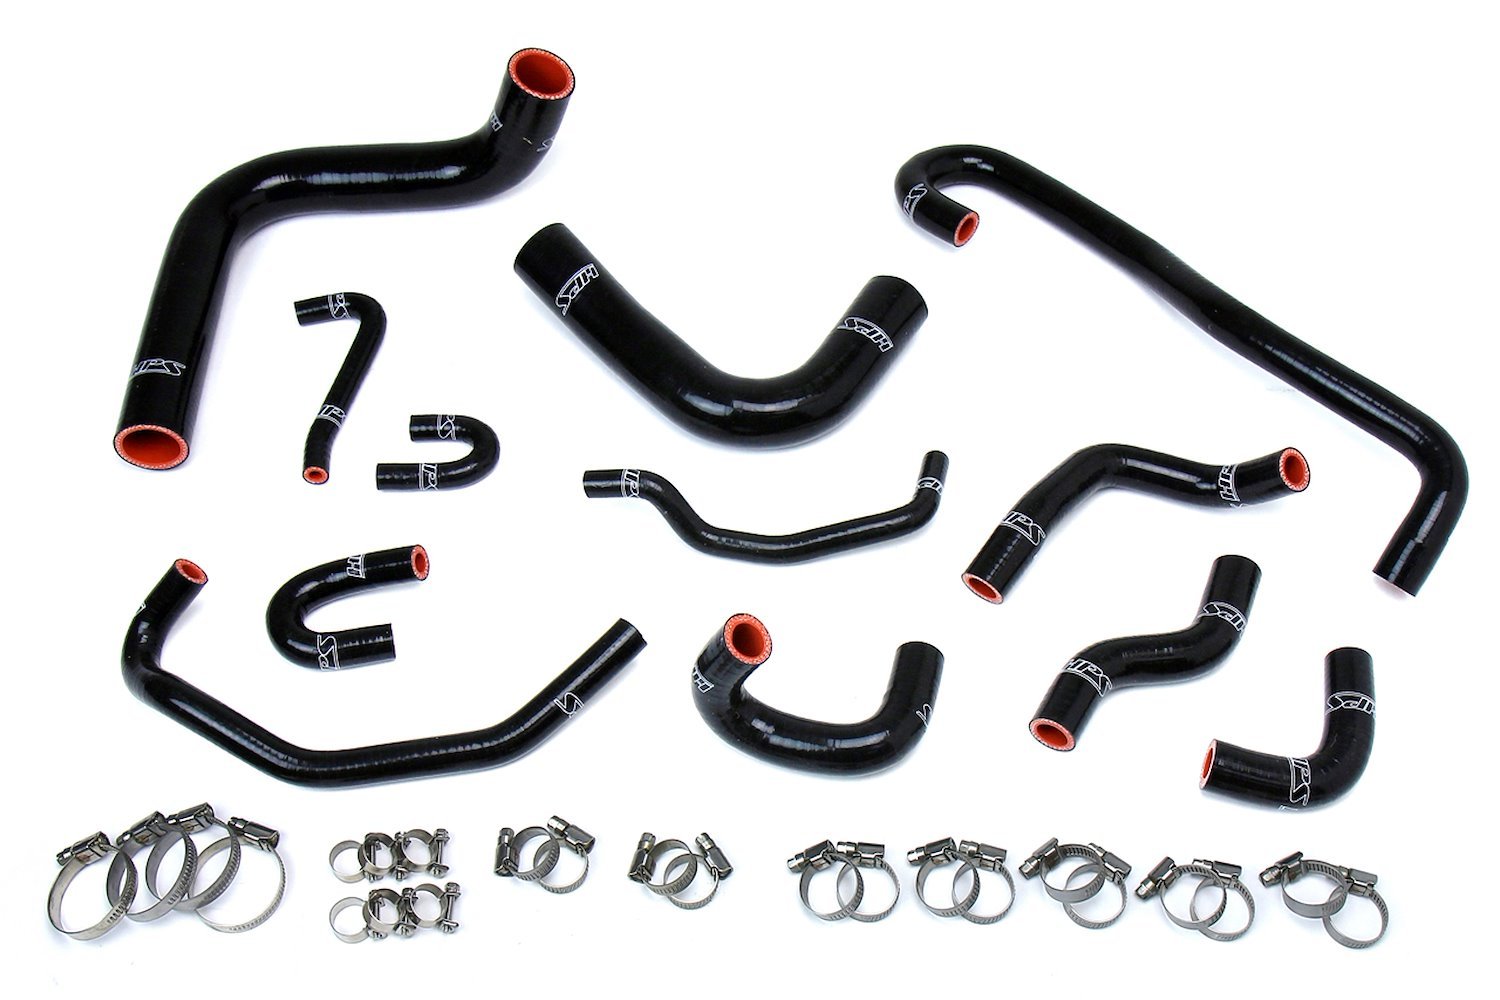 57-1656-BLK Coolant Hose Kit, High-Temp 3-Ply Reinforced Silicone, Replace Rubber Radiator Heater Coolant Hoses